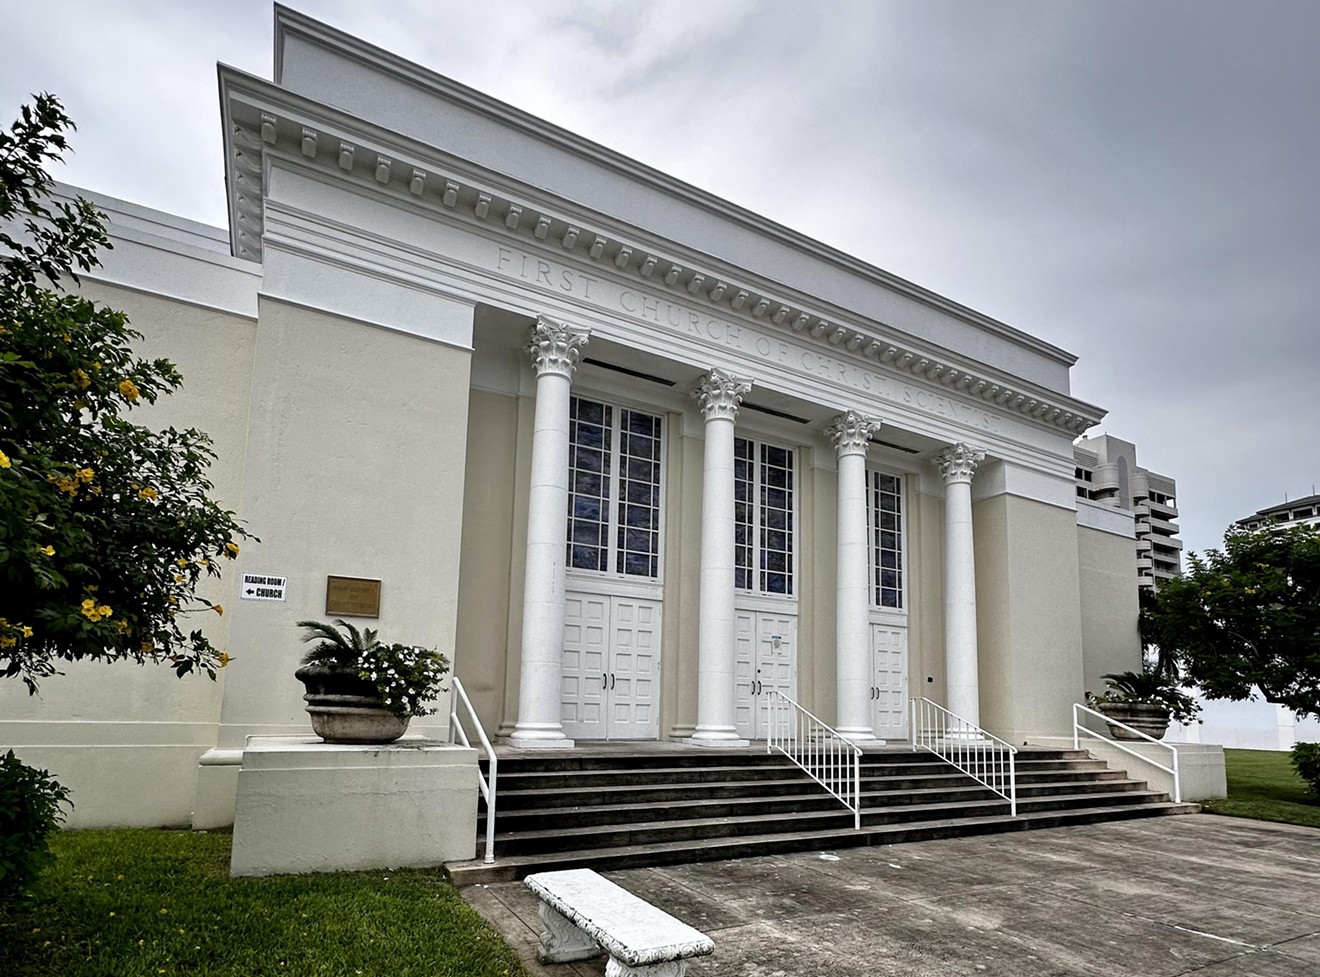 Sanctuary of the Arts, a former church turned cultural center, aims to be a hub for the arts in Coral Gables.